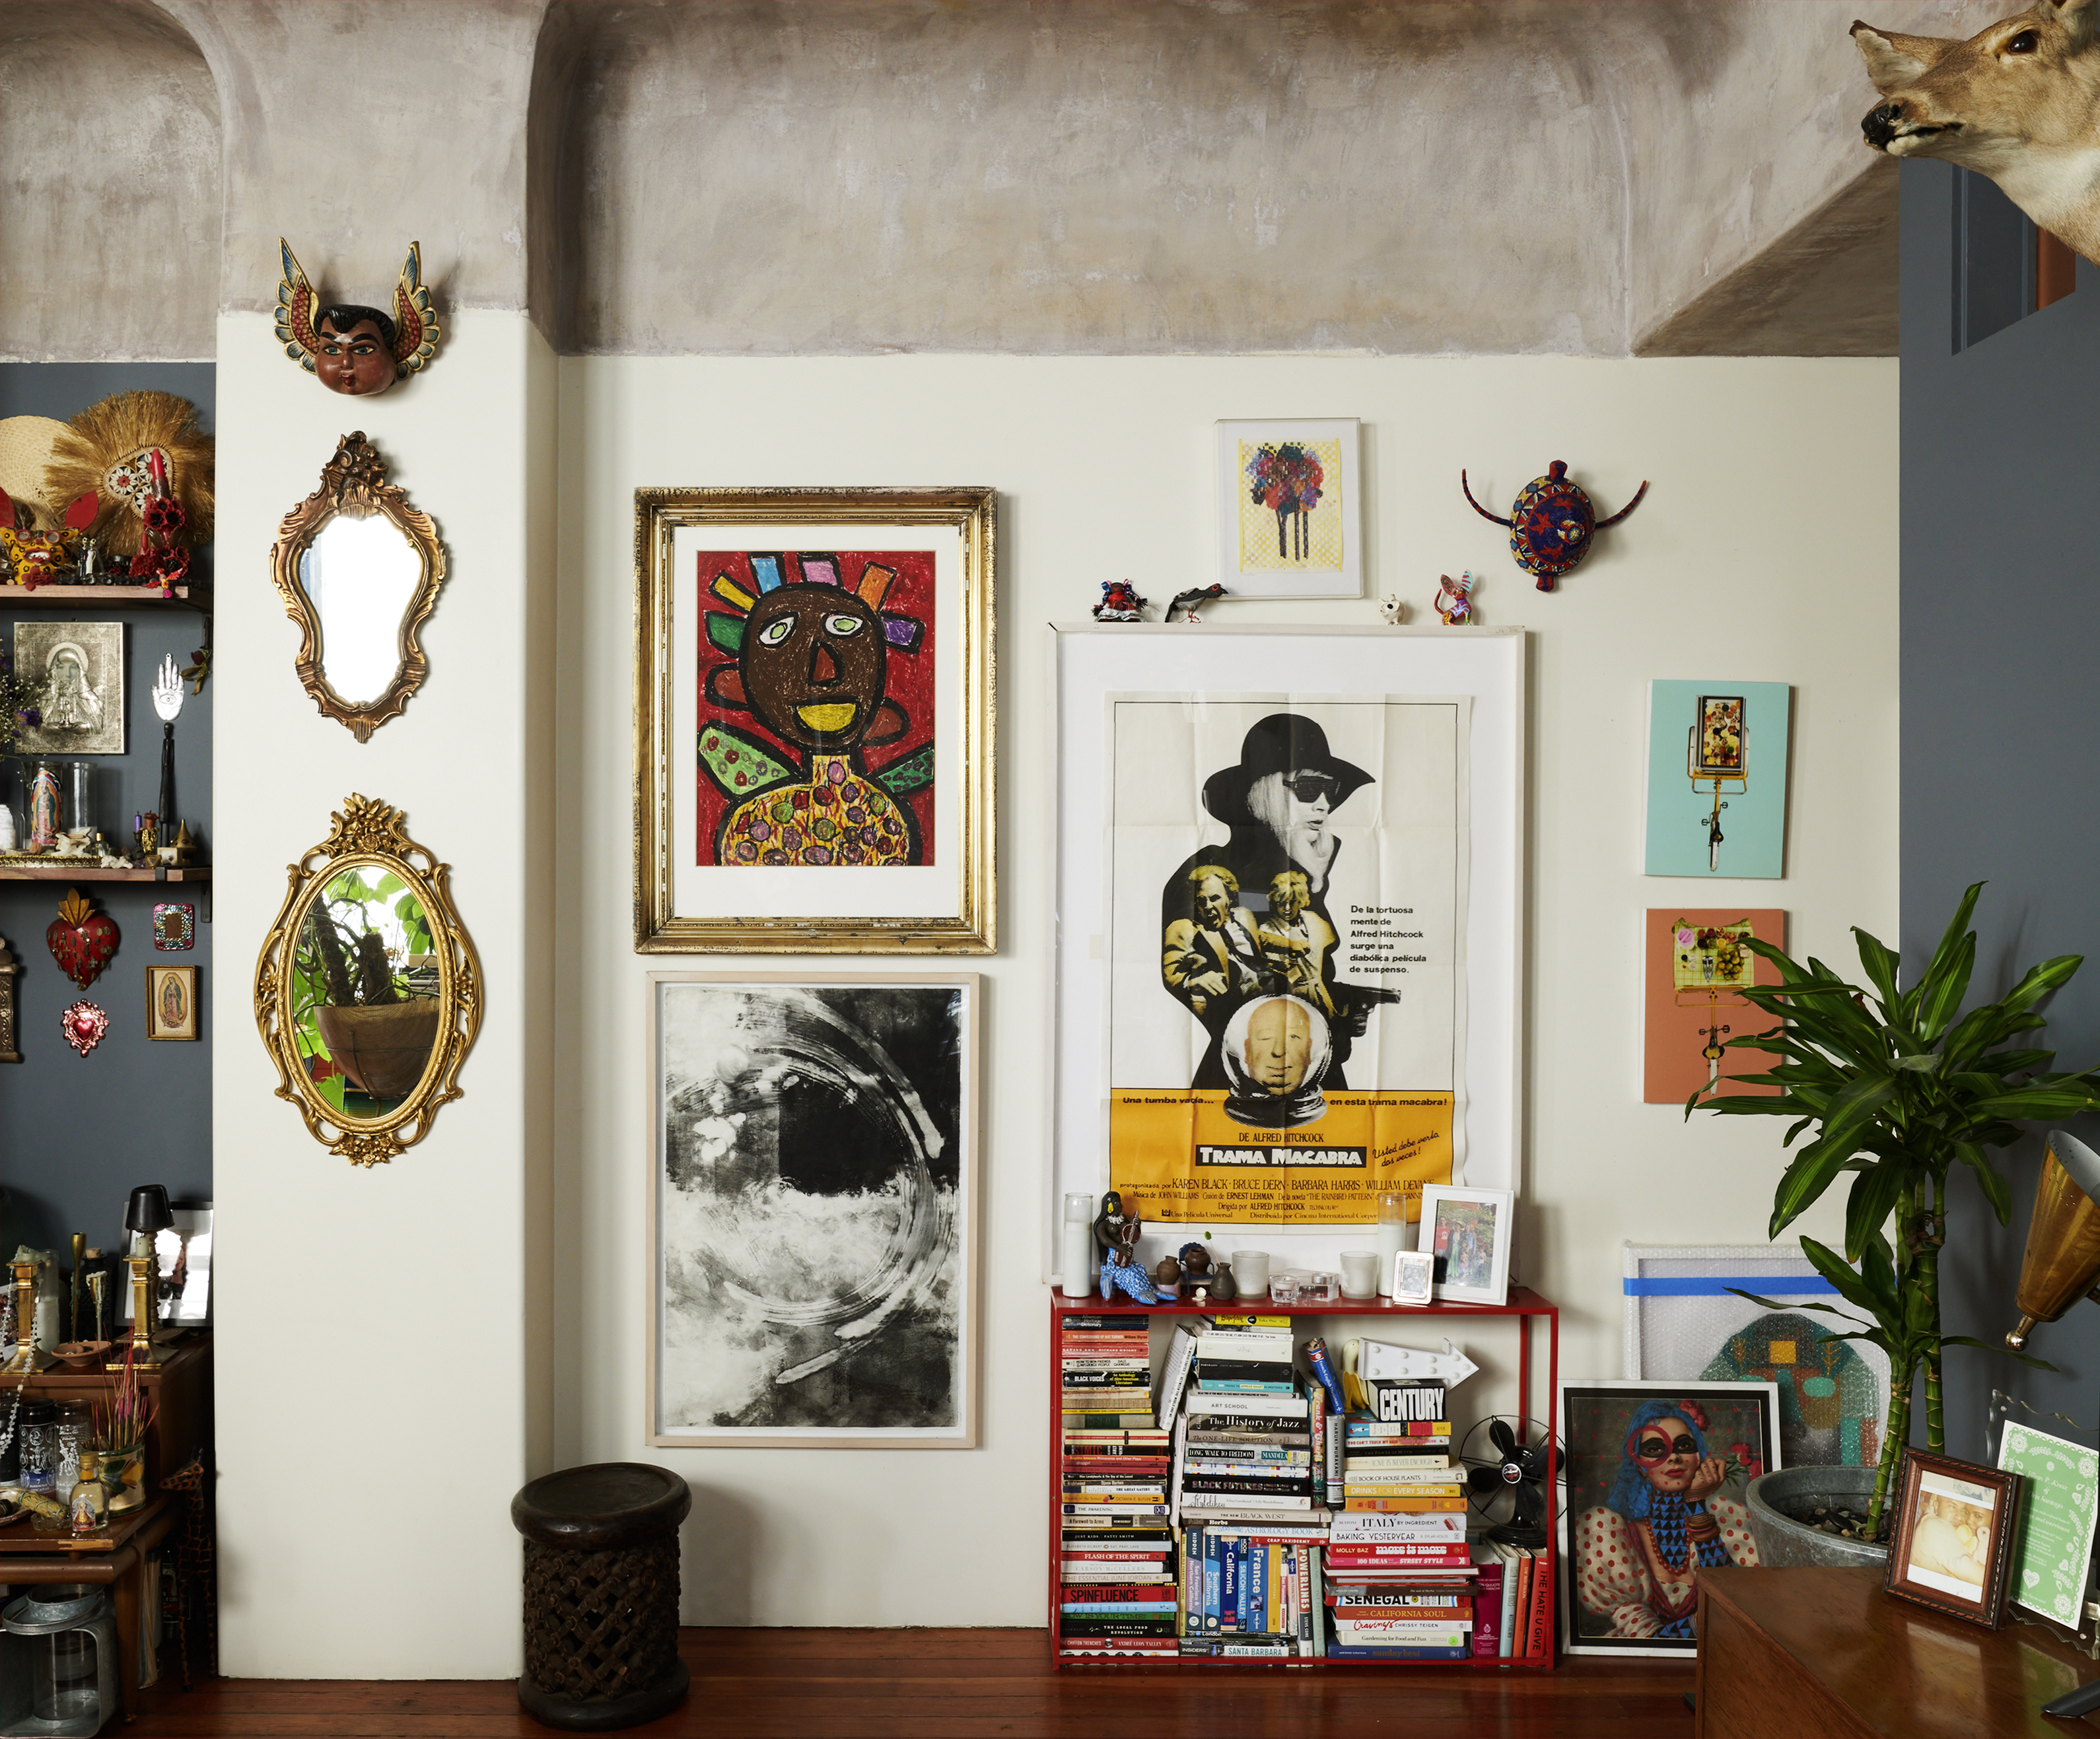 The image shows an eclectic living space with various framed artworks, a bookshelf filled with books, a plant, mirrors, a deer head mount, and other decorative items and trinkets.